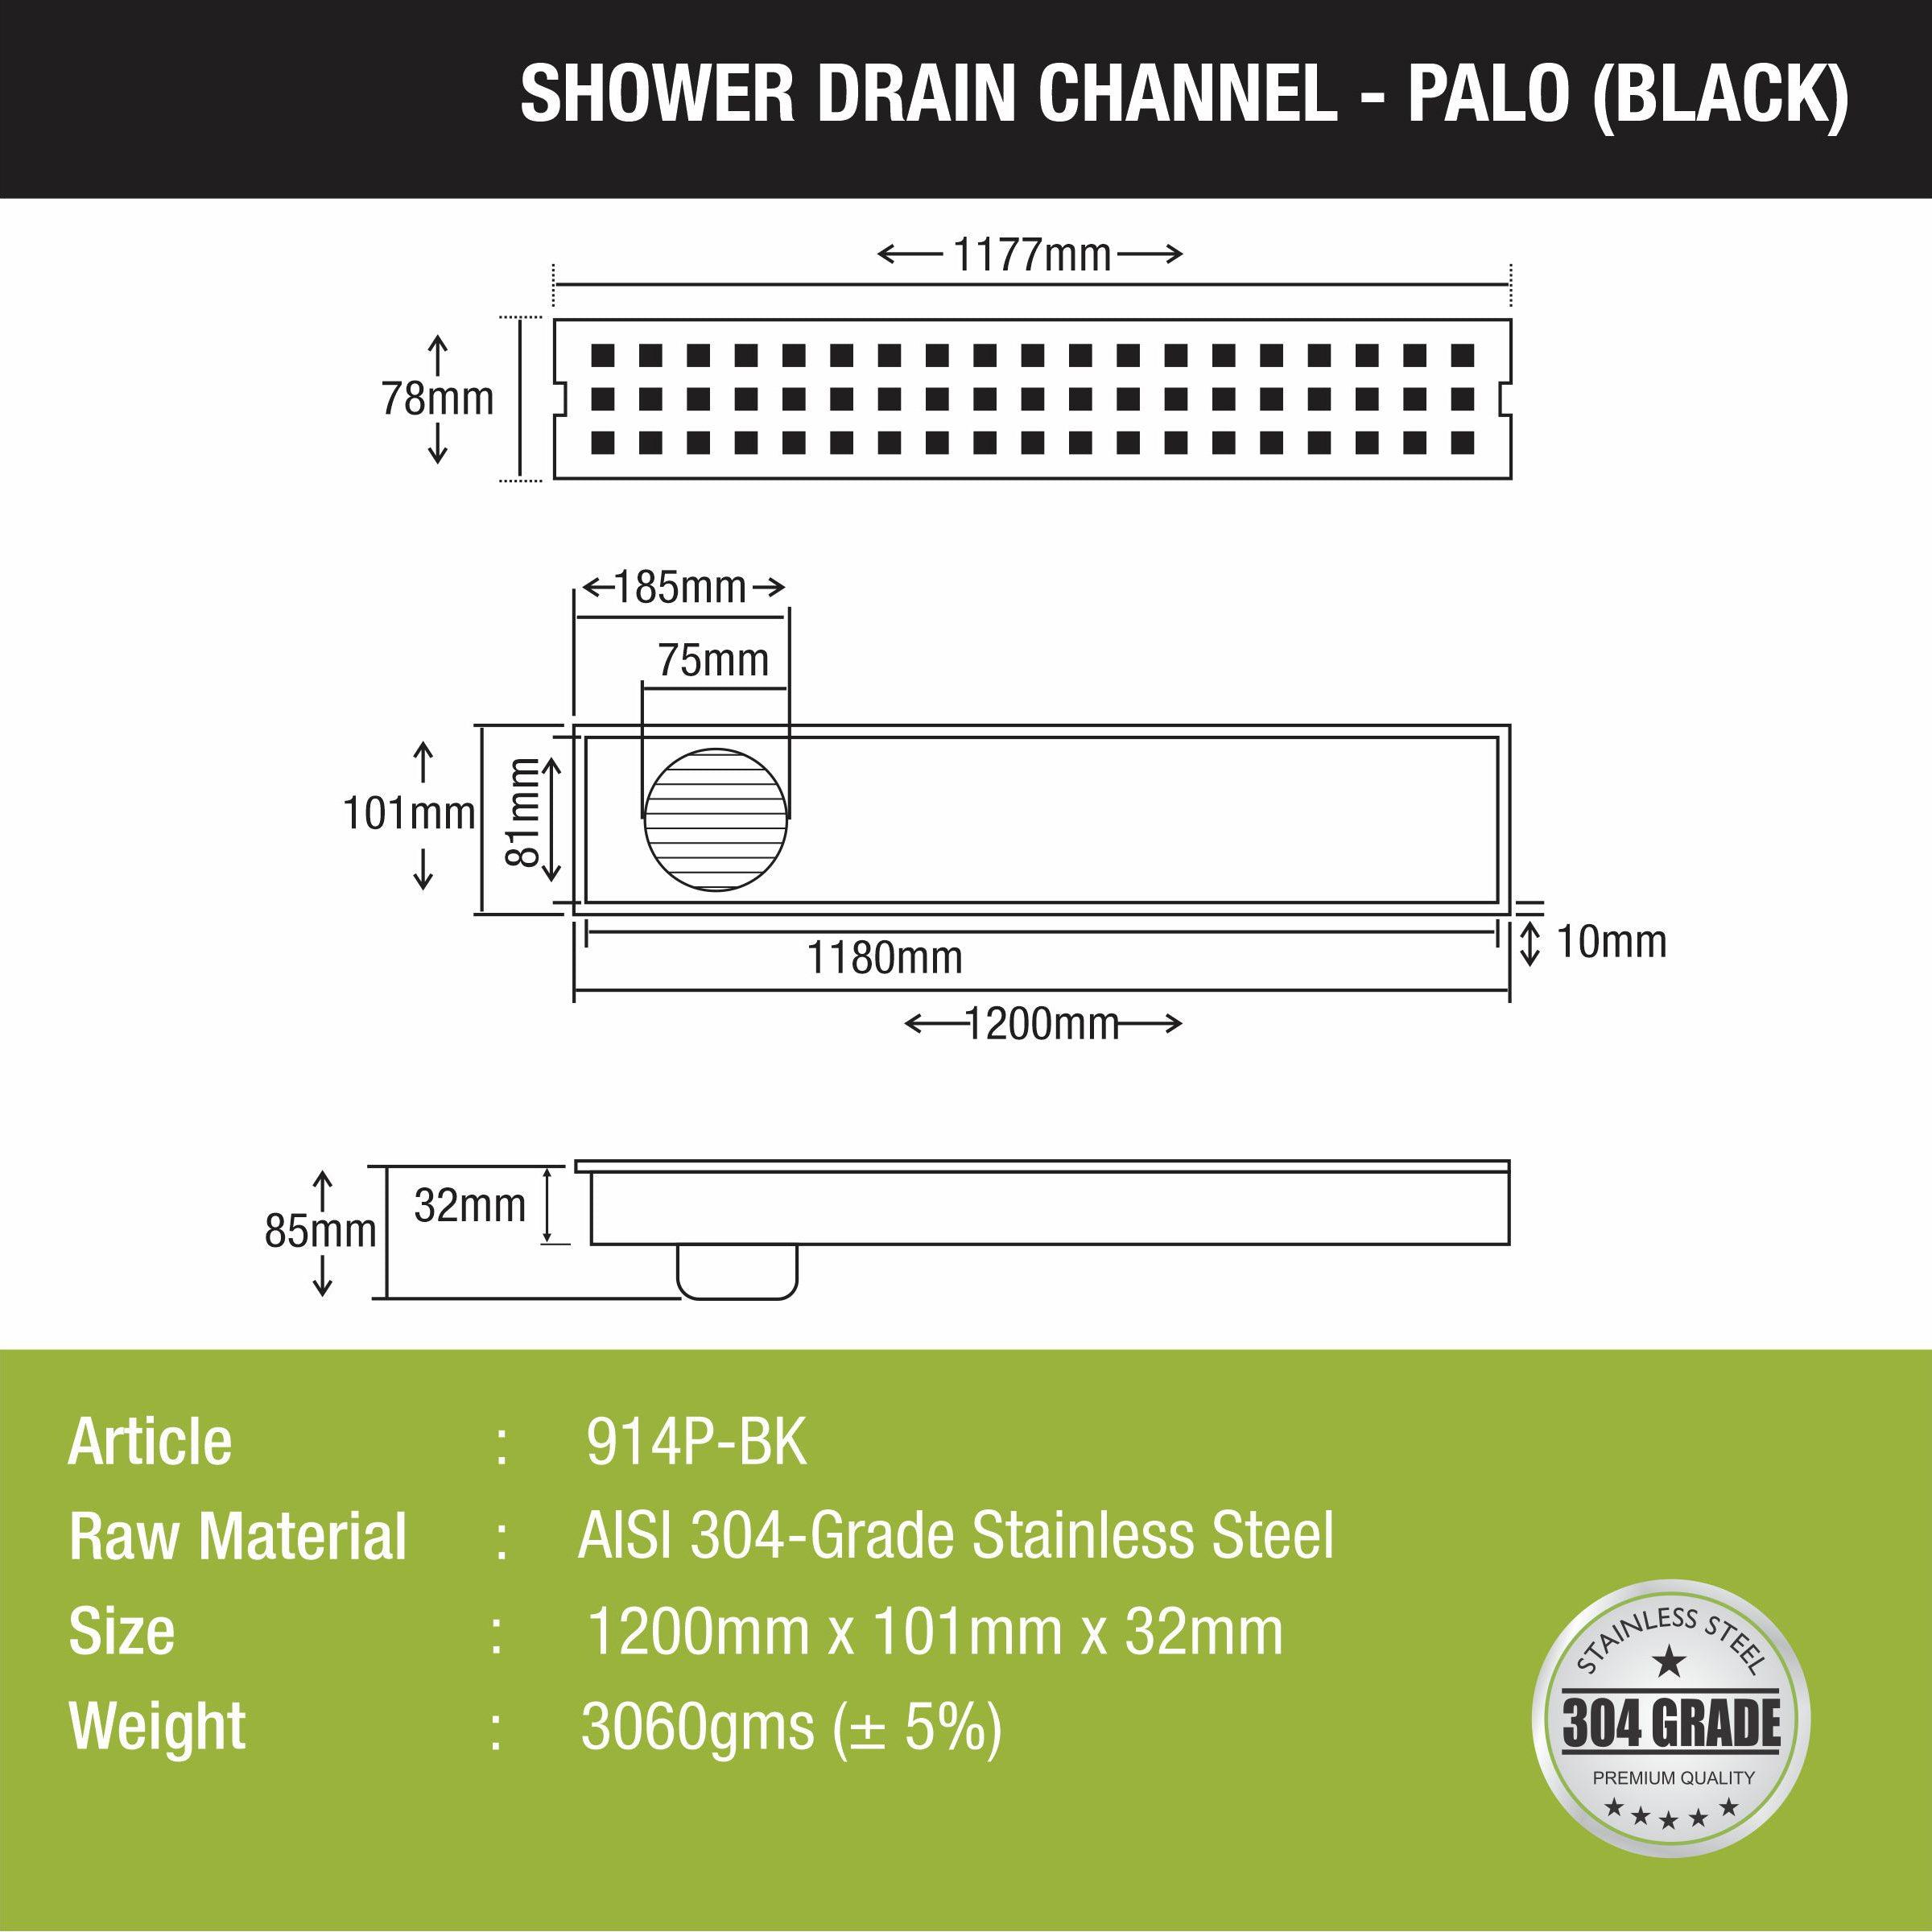 Palo Shower Drain Channel - Black (48 x 4 Inches) size and measurement